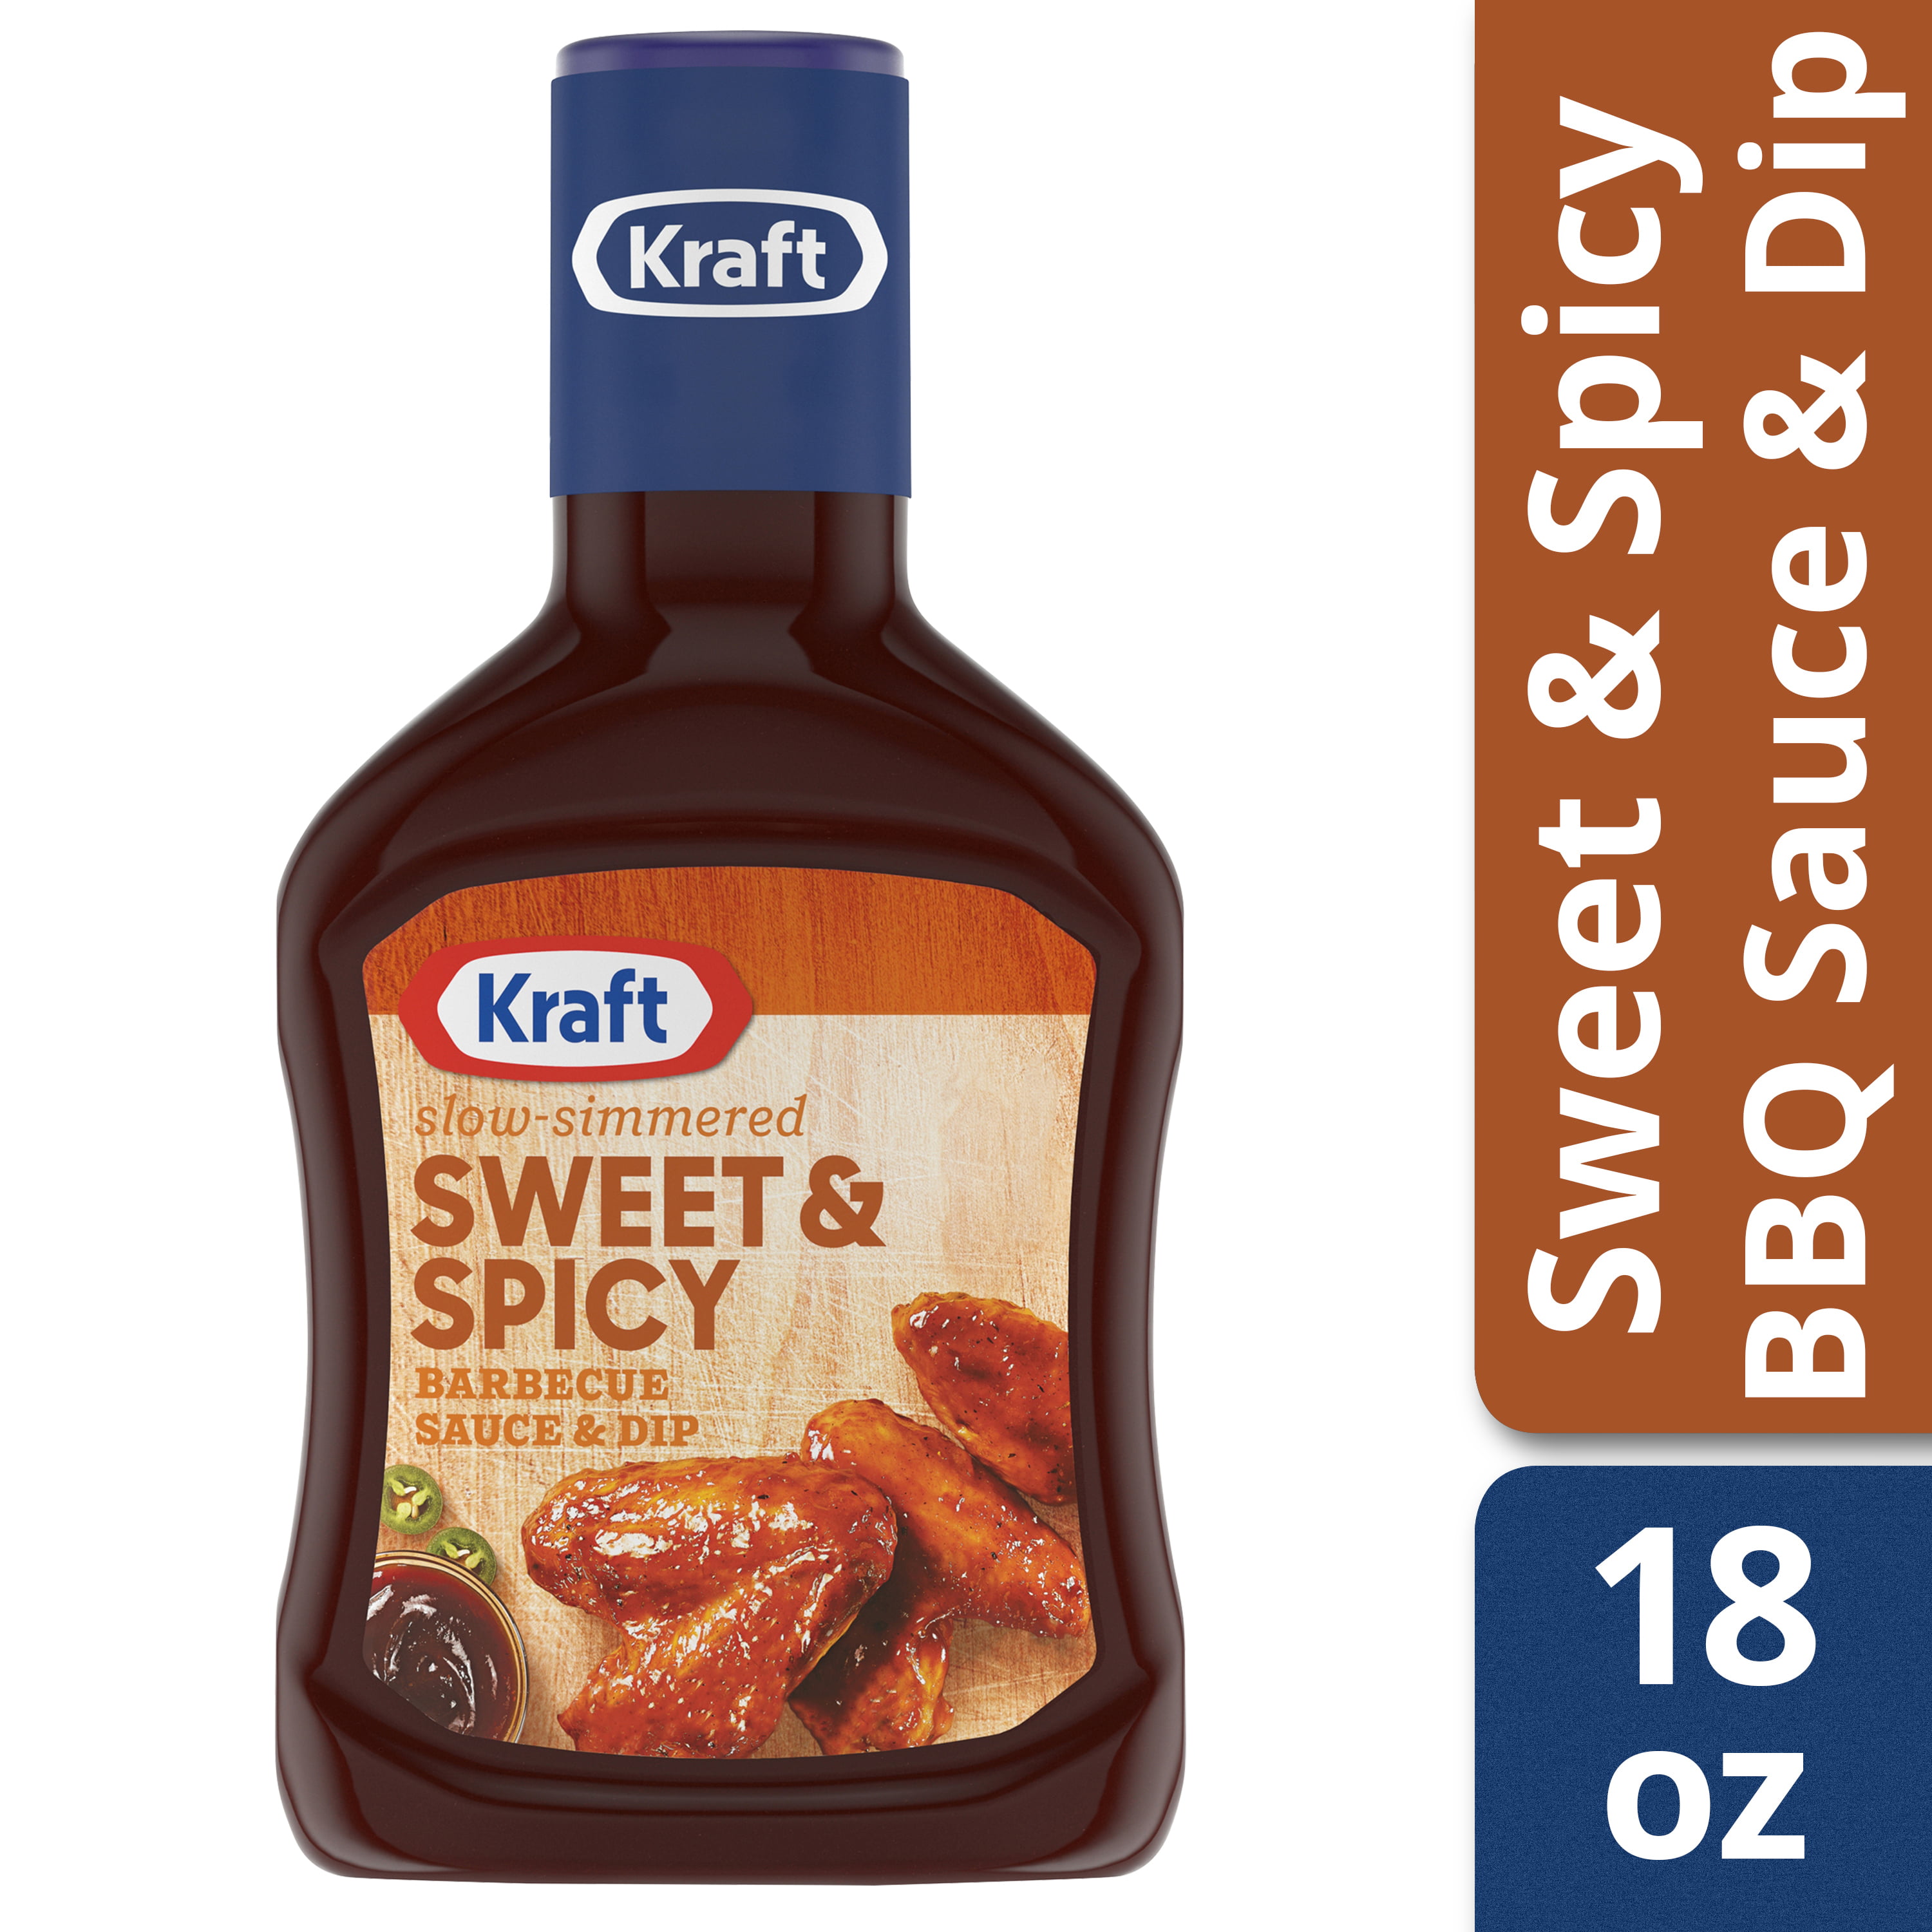 Kraft Sweet and Spicy Slow-Simmered Barbecue Sauce and Dip, 18 oz ...